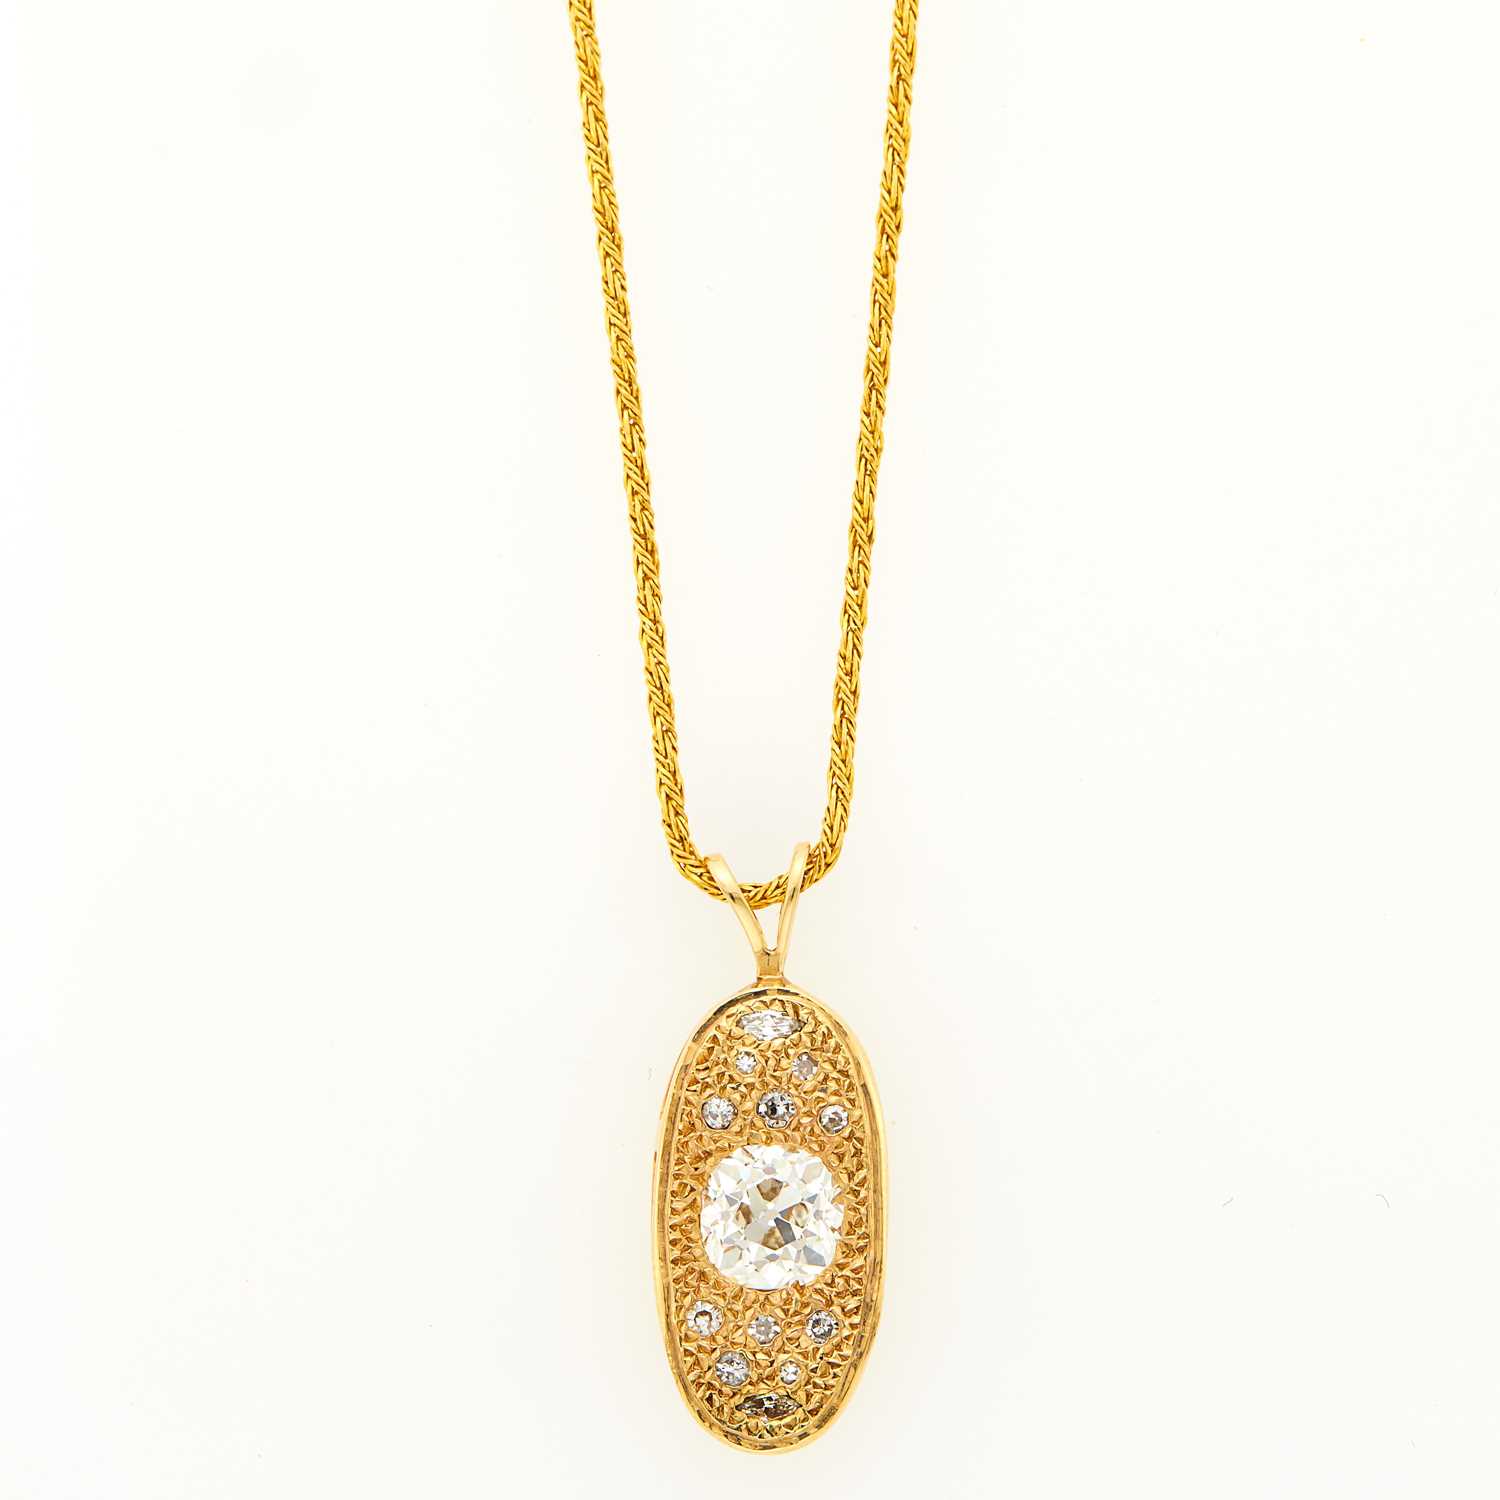 Lot 1205 - Gold and Diamond Pendant with Chain Necklace